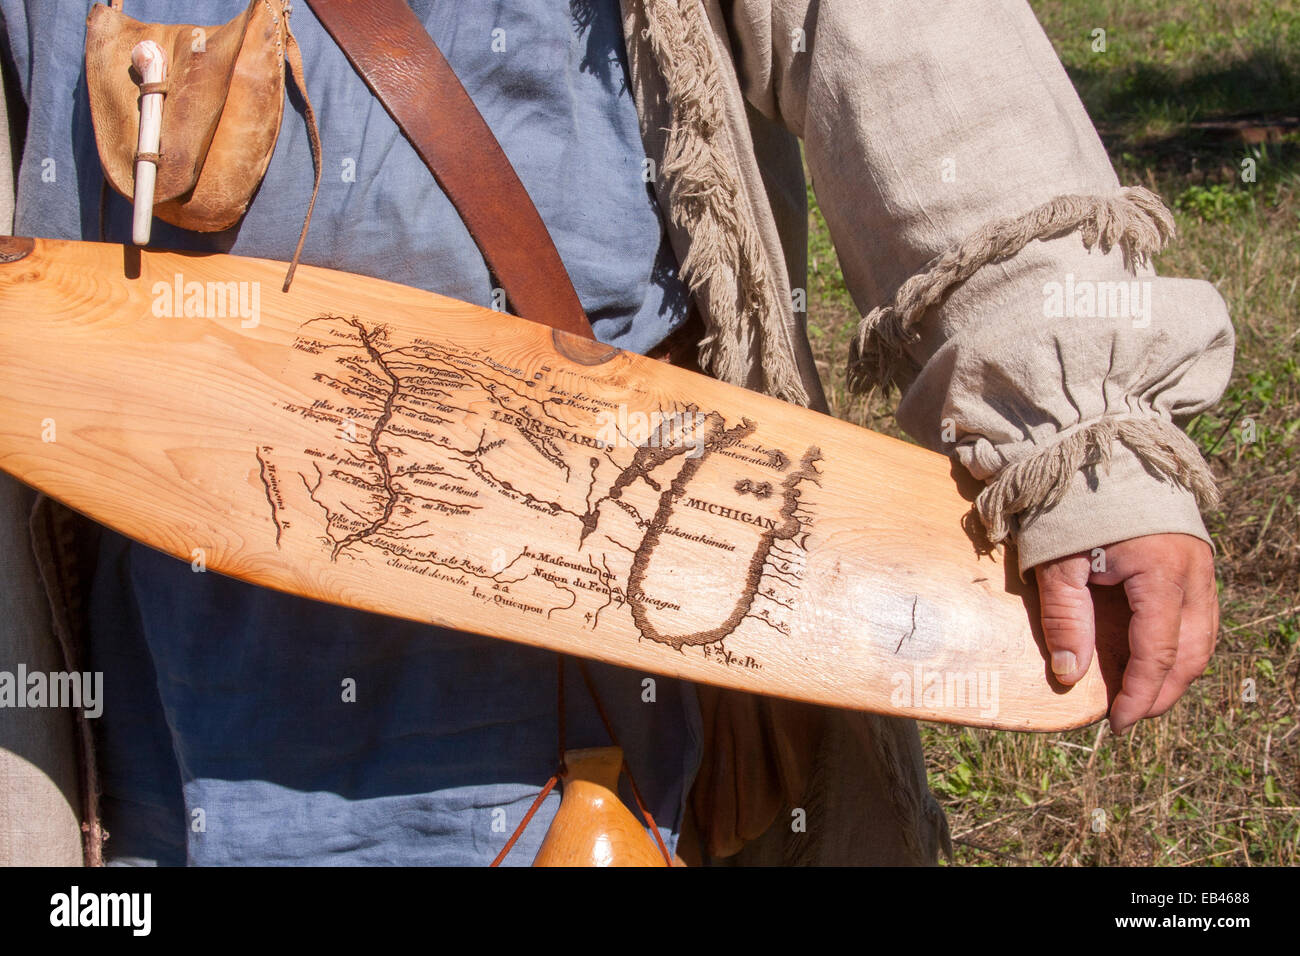 French Voyageur Explorer holding a canoe paddle with an old map of the Great Lakes burned onto it Stock Photo